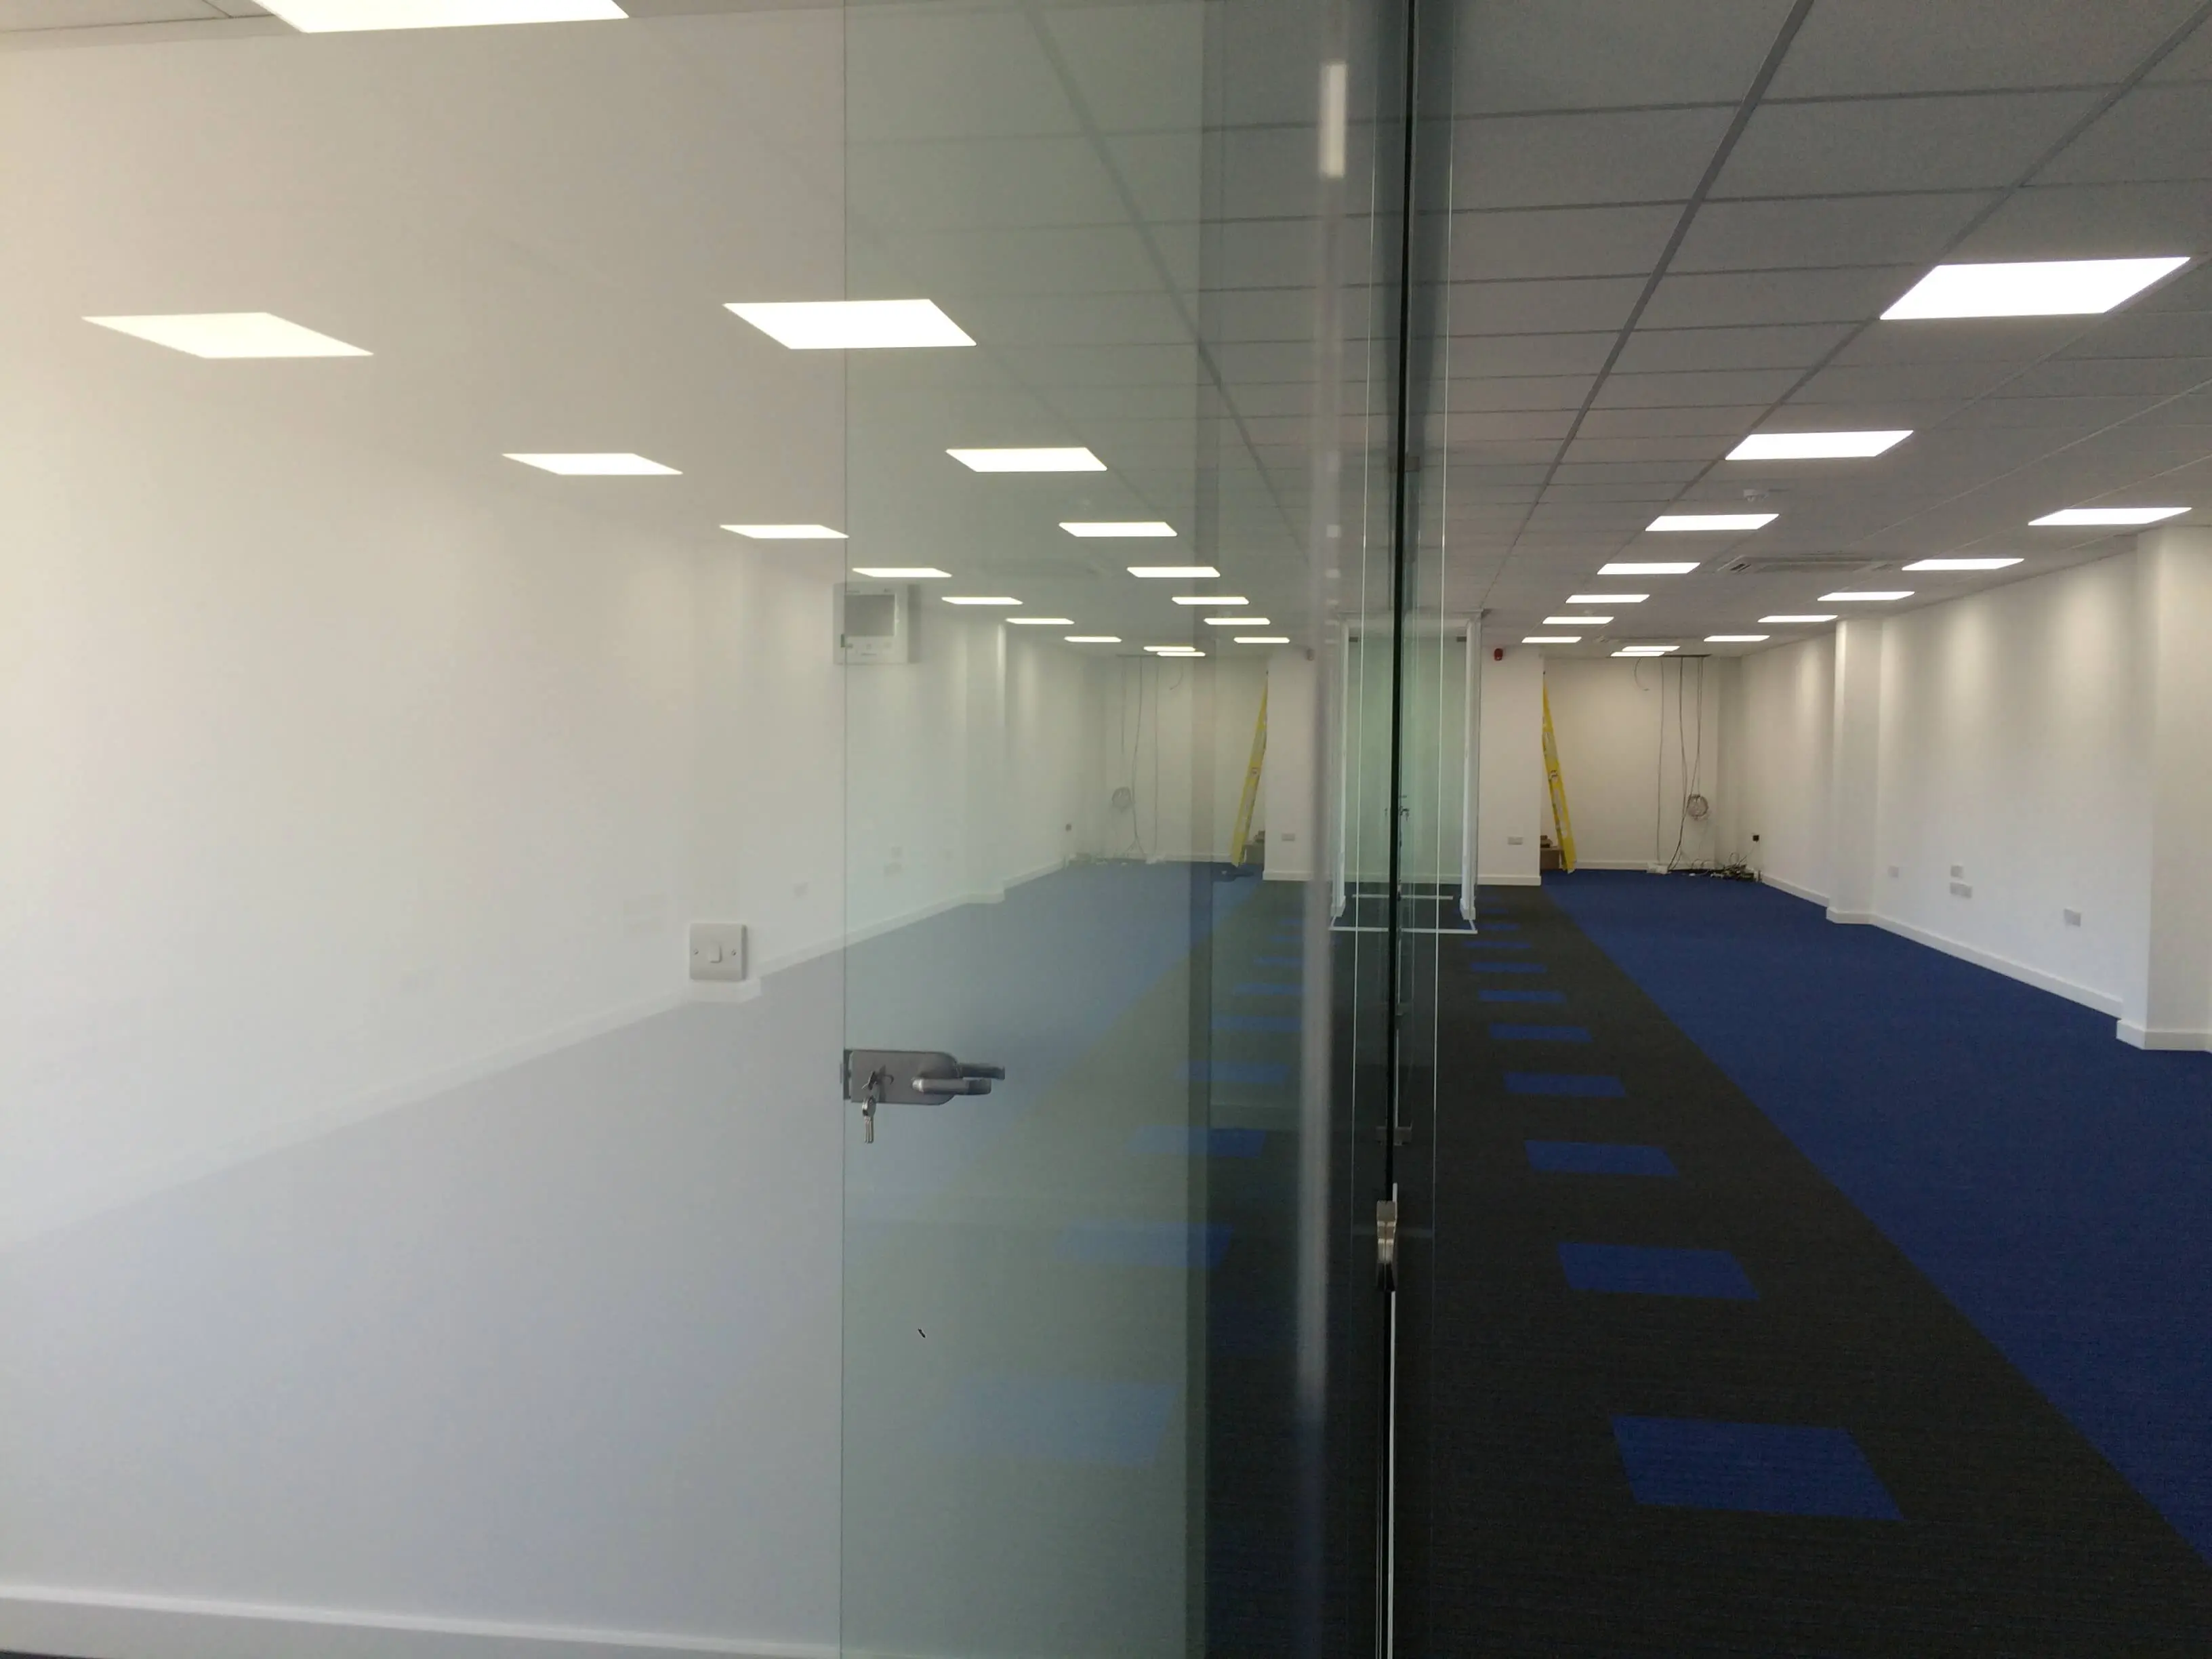 Large office space with single glazed glass partitions and lighting